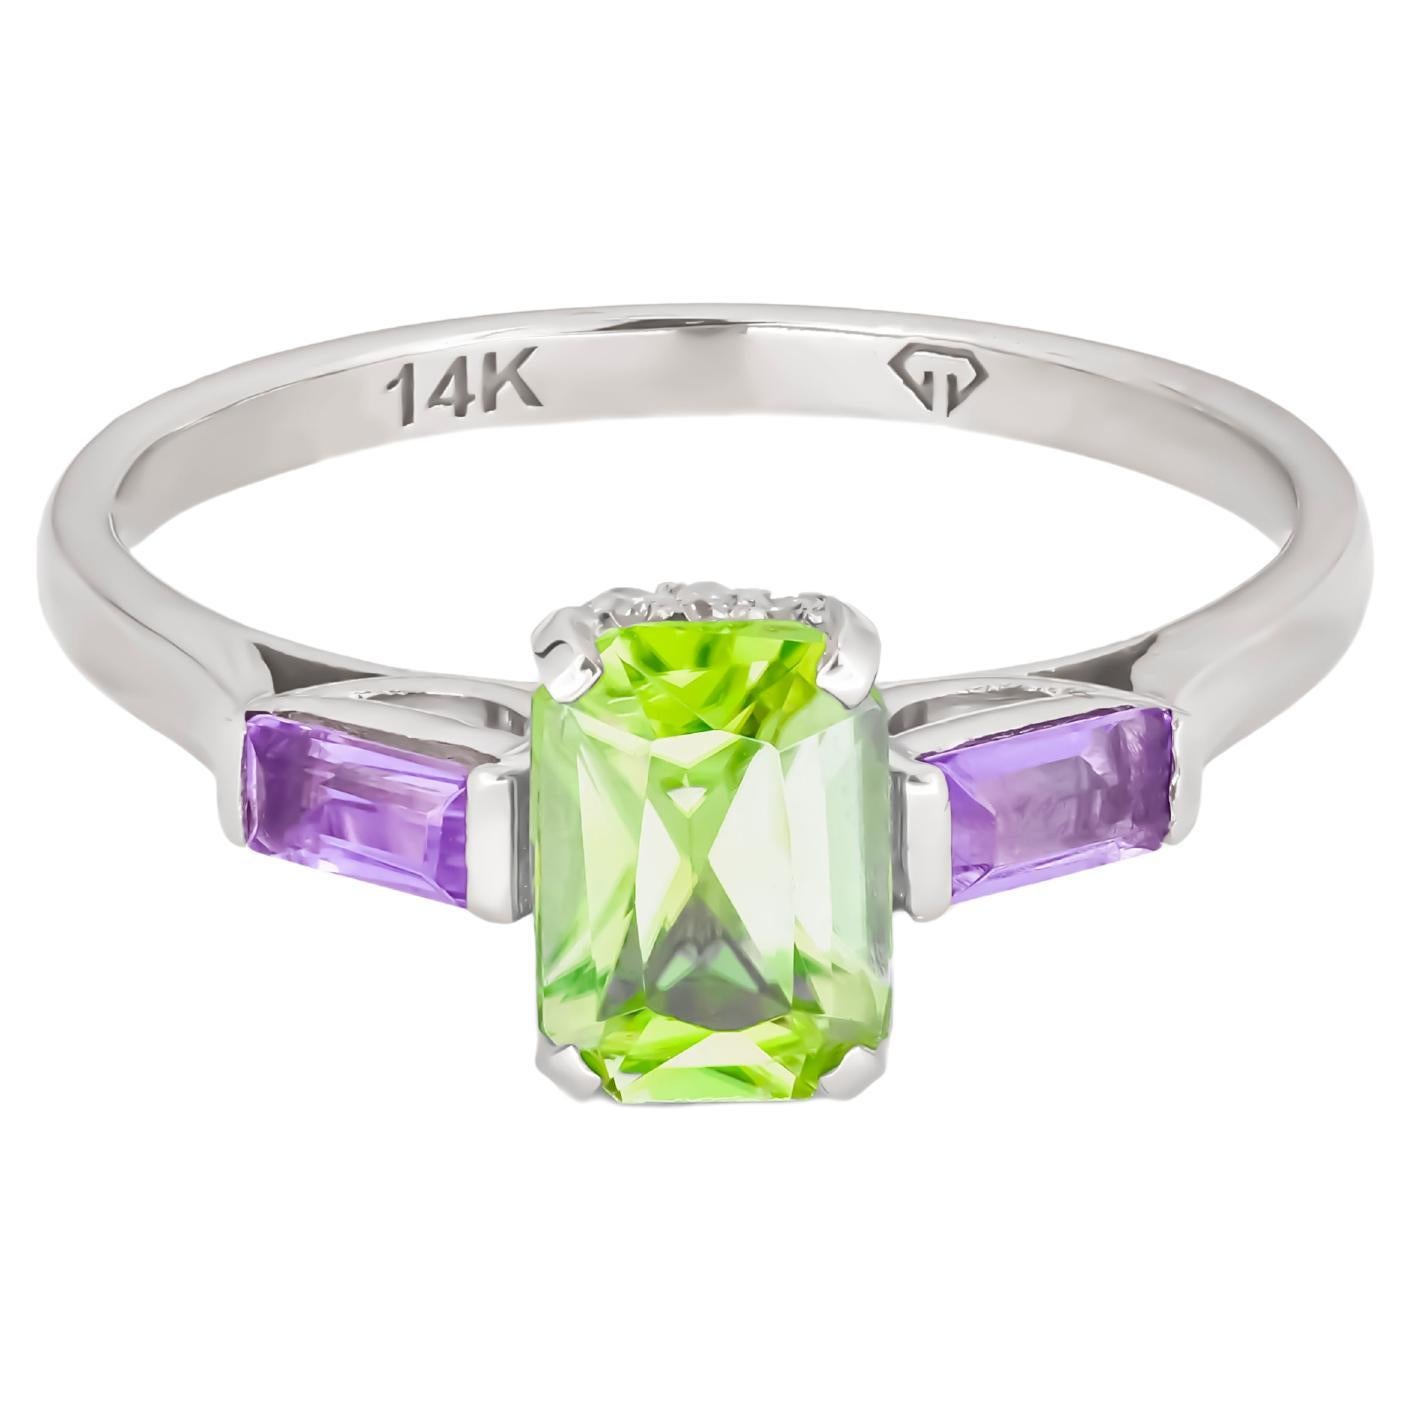 For Sale:  Octagon lab peridot 14k gold ring.